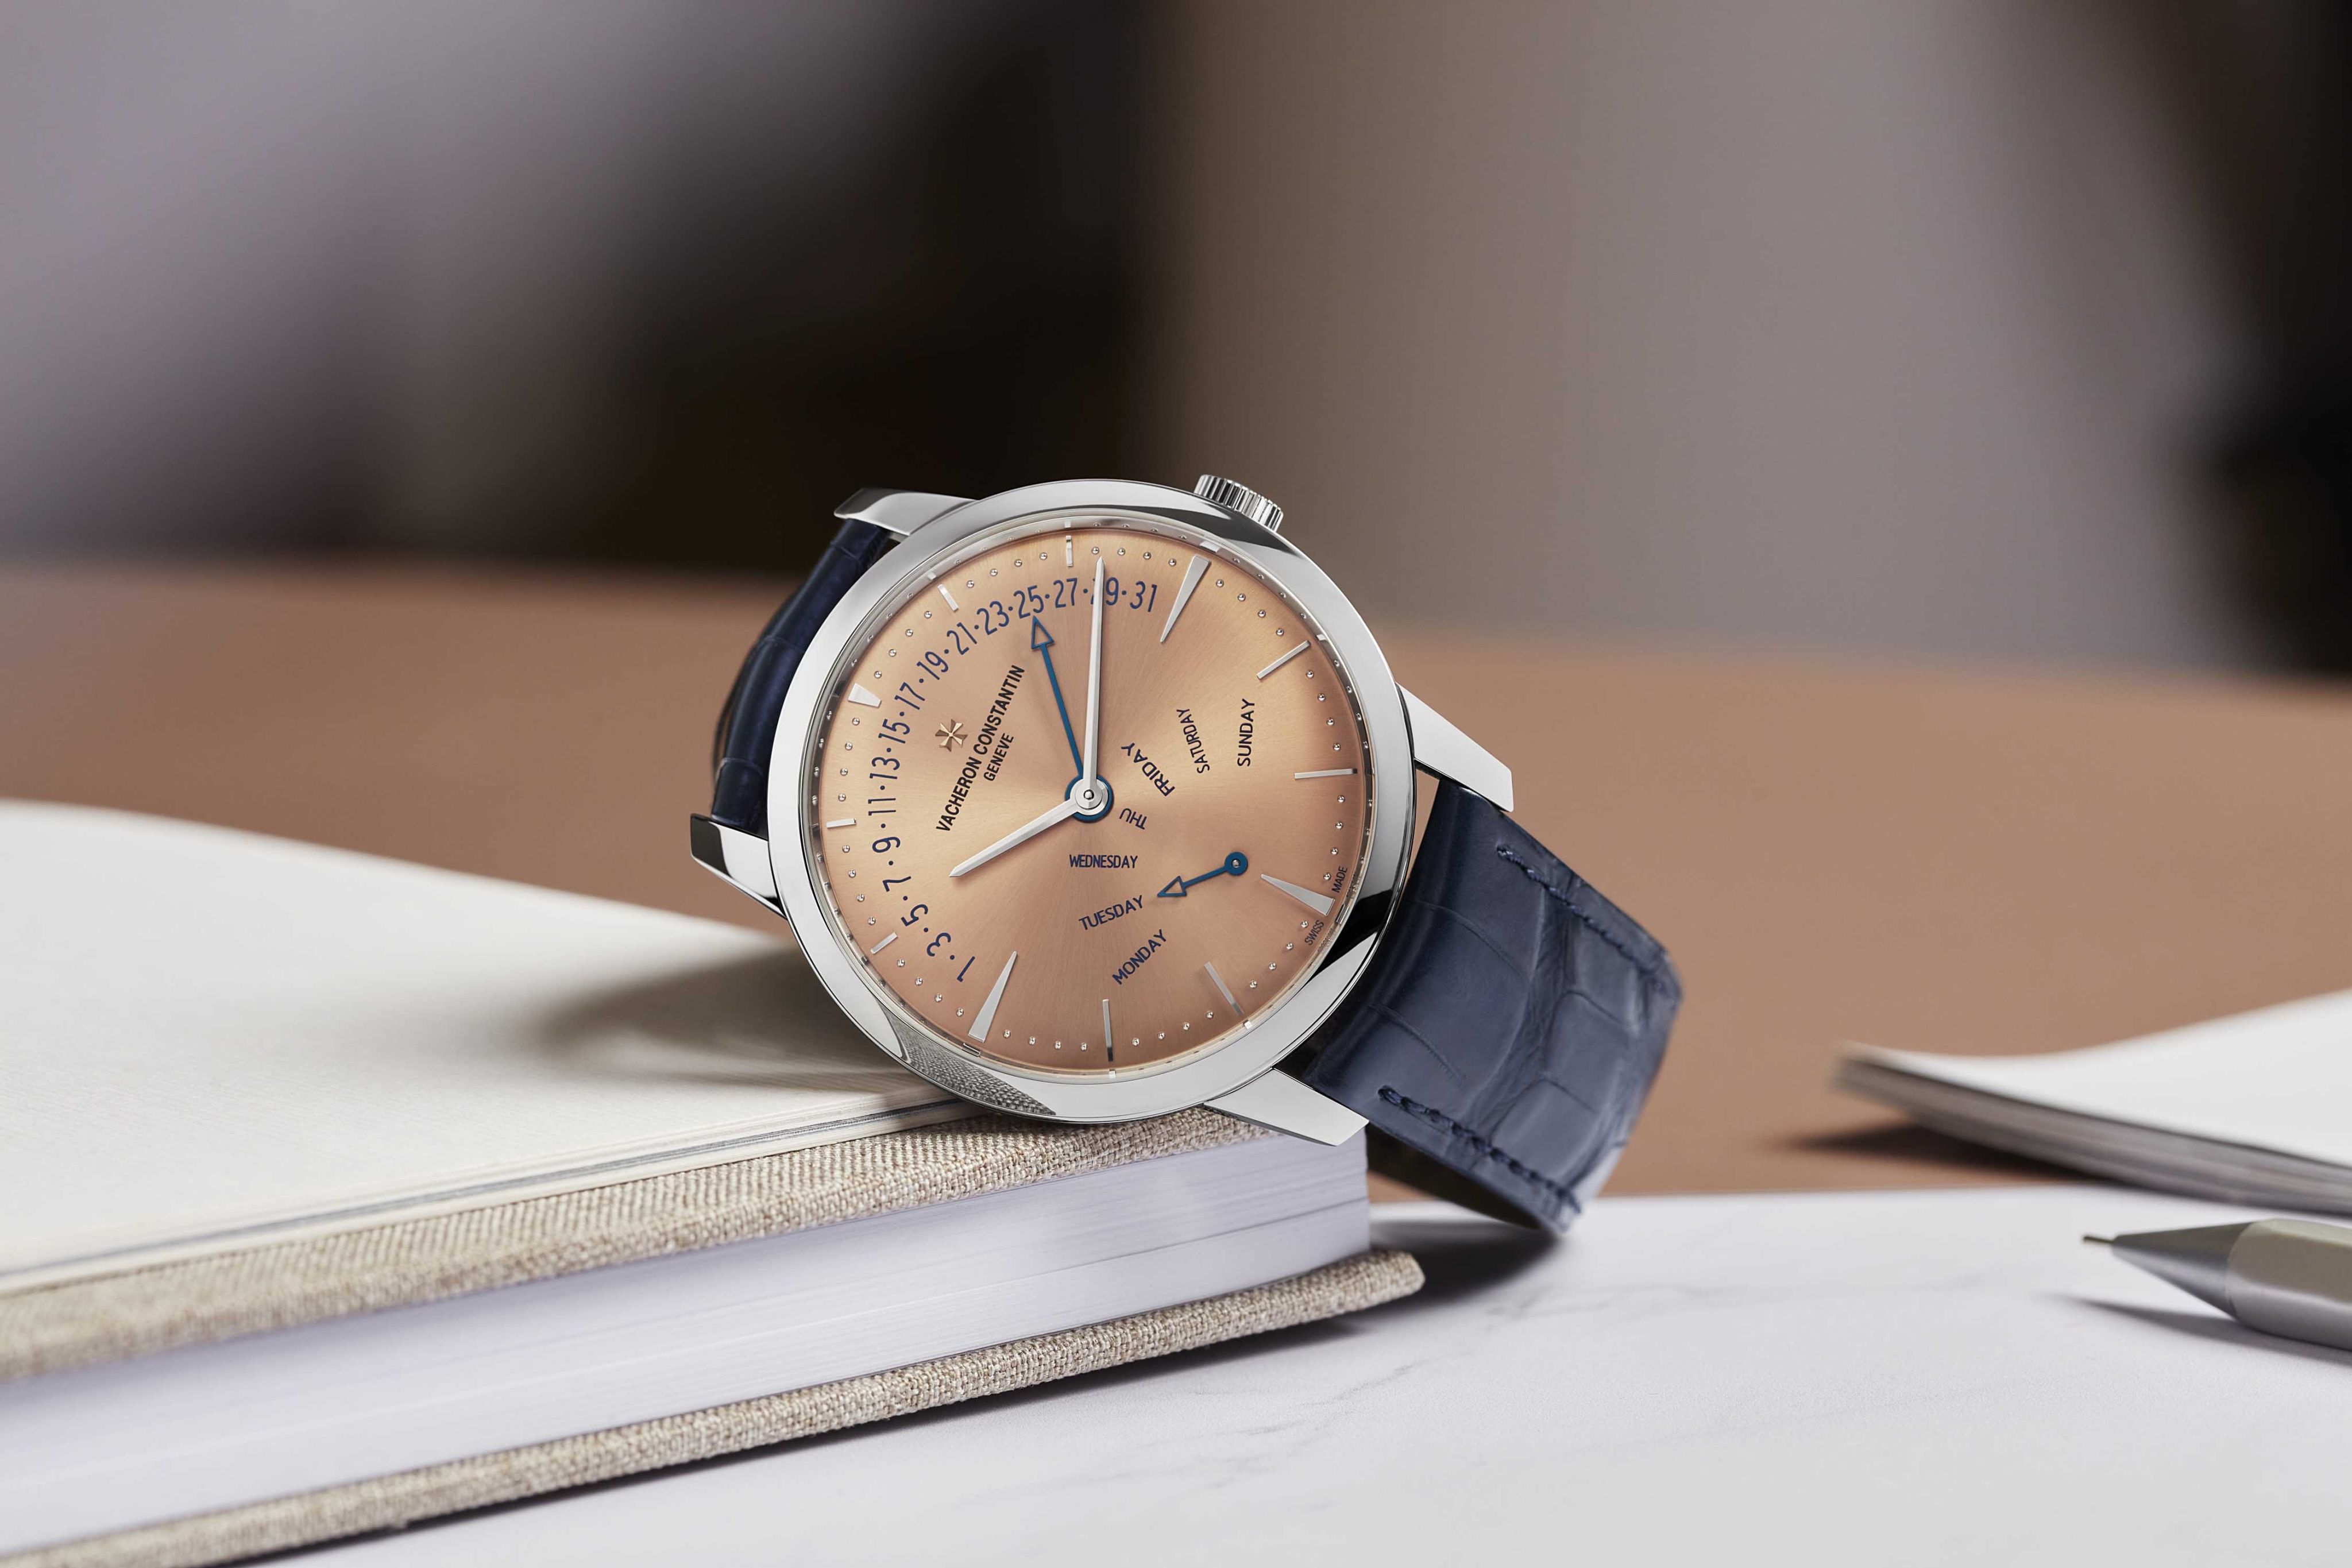 Vacheron Constantin’s Patrimony Retrograde Day-date stands out from the crowd. Photos: Vacheron Constantin